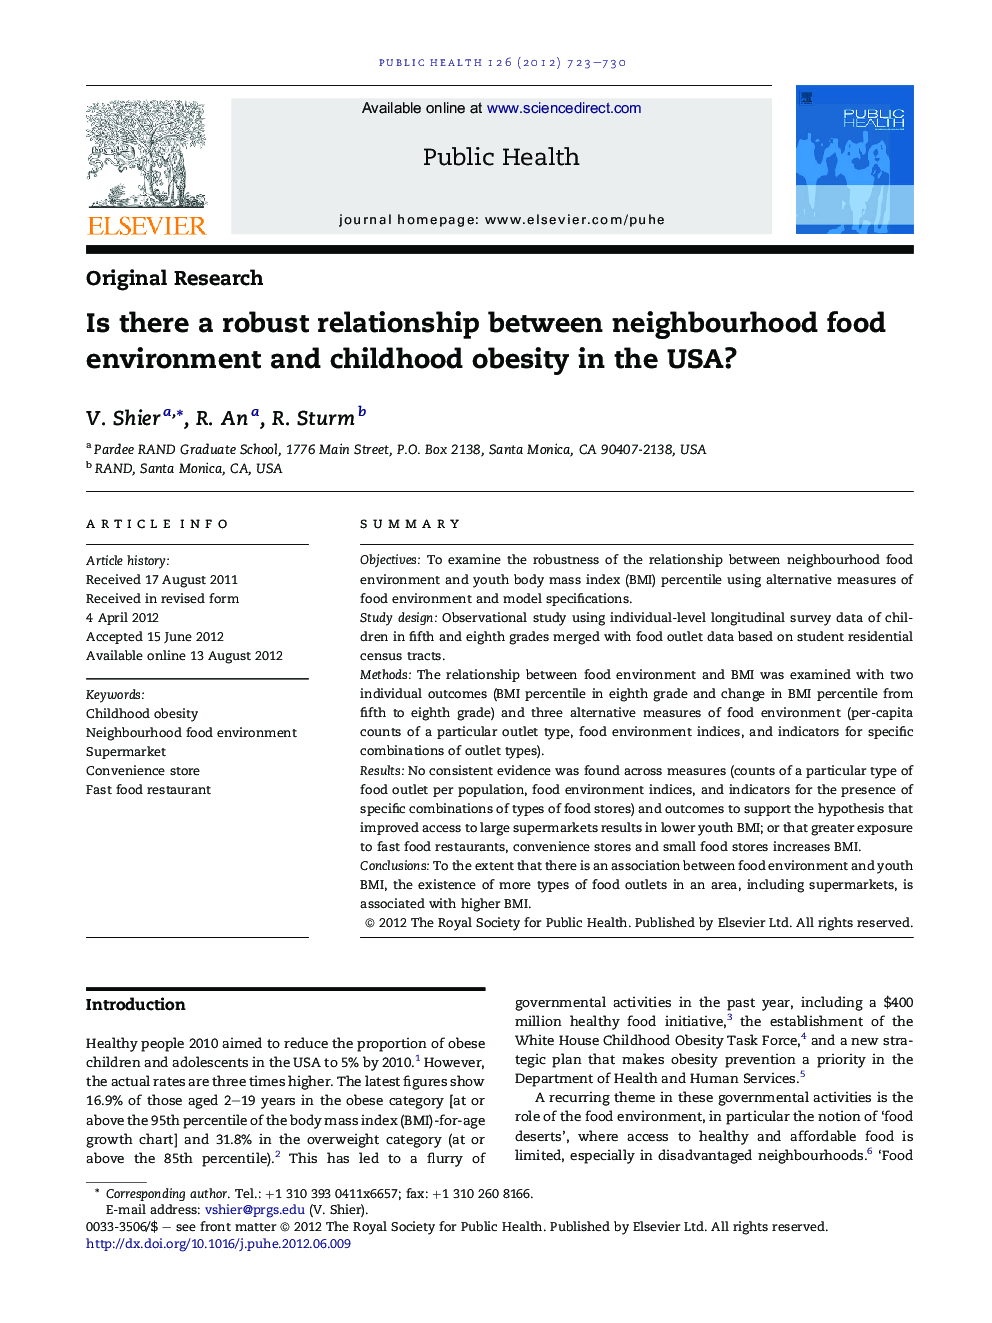 Is there a robust relationship between neighbourhood food environment and childhood obesity in the USA?